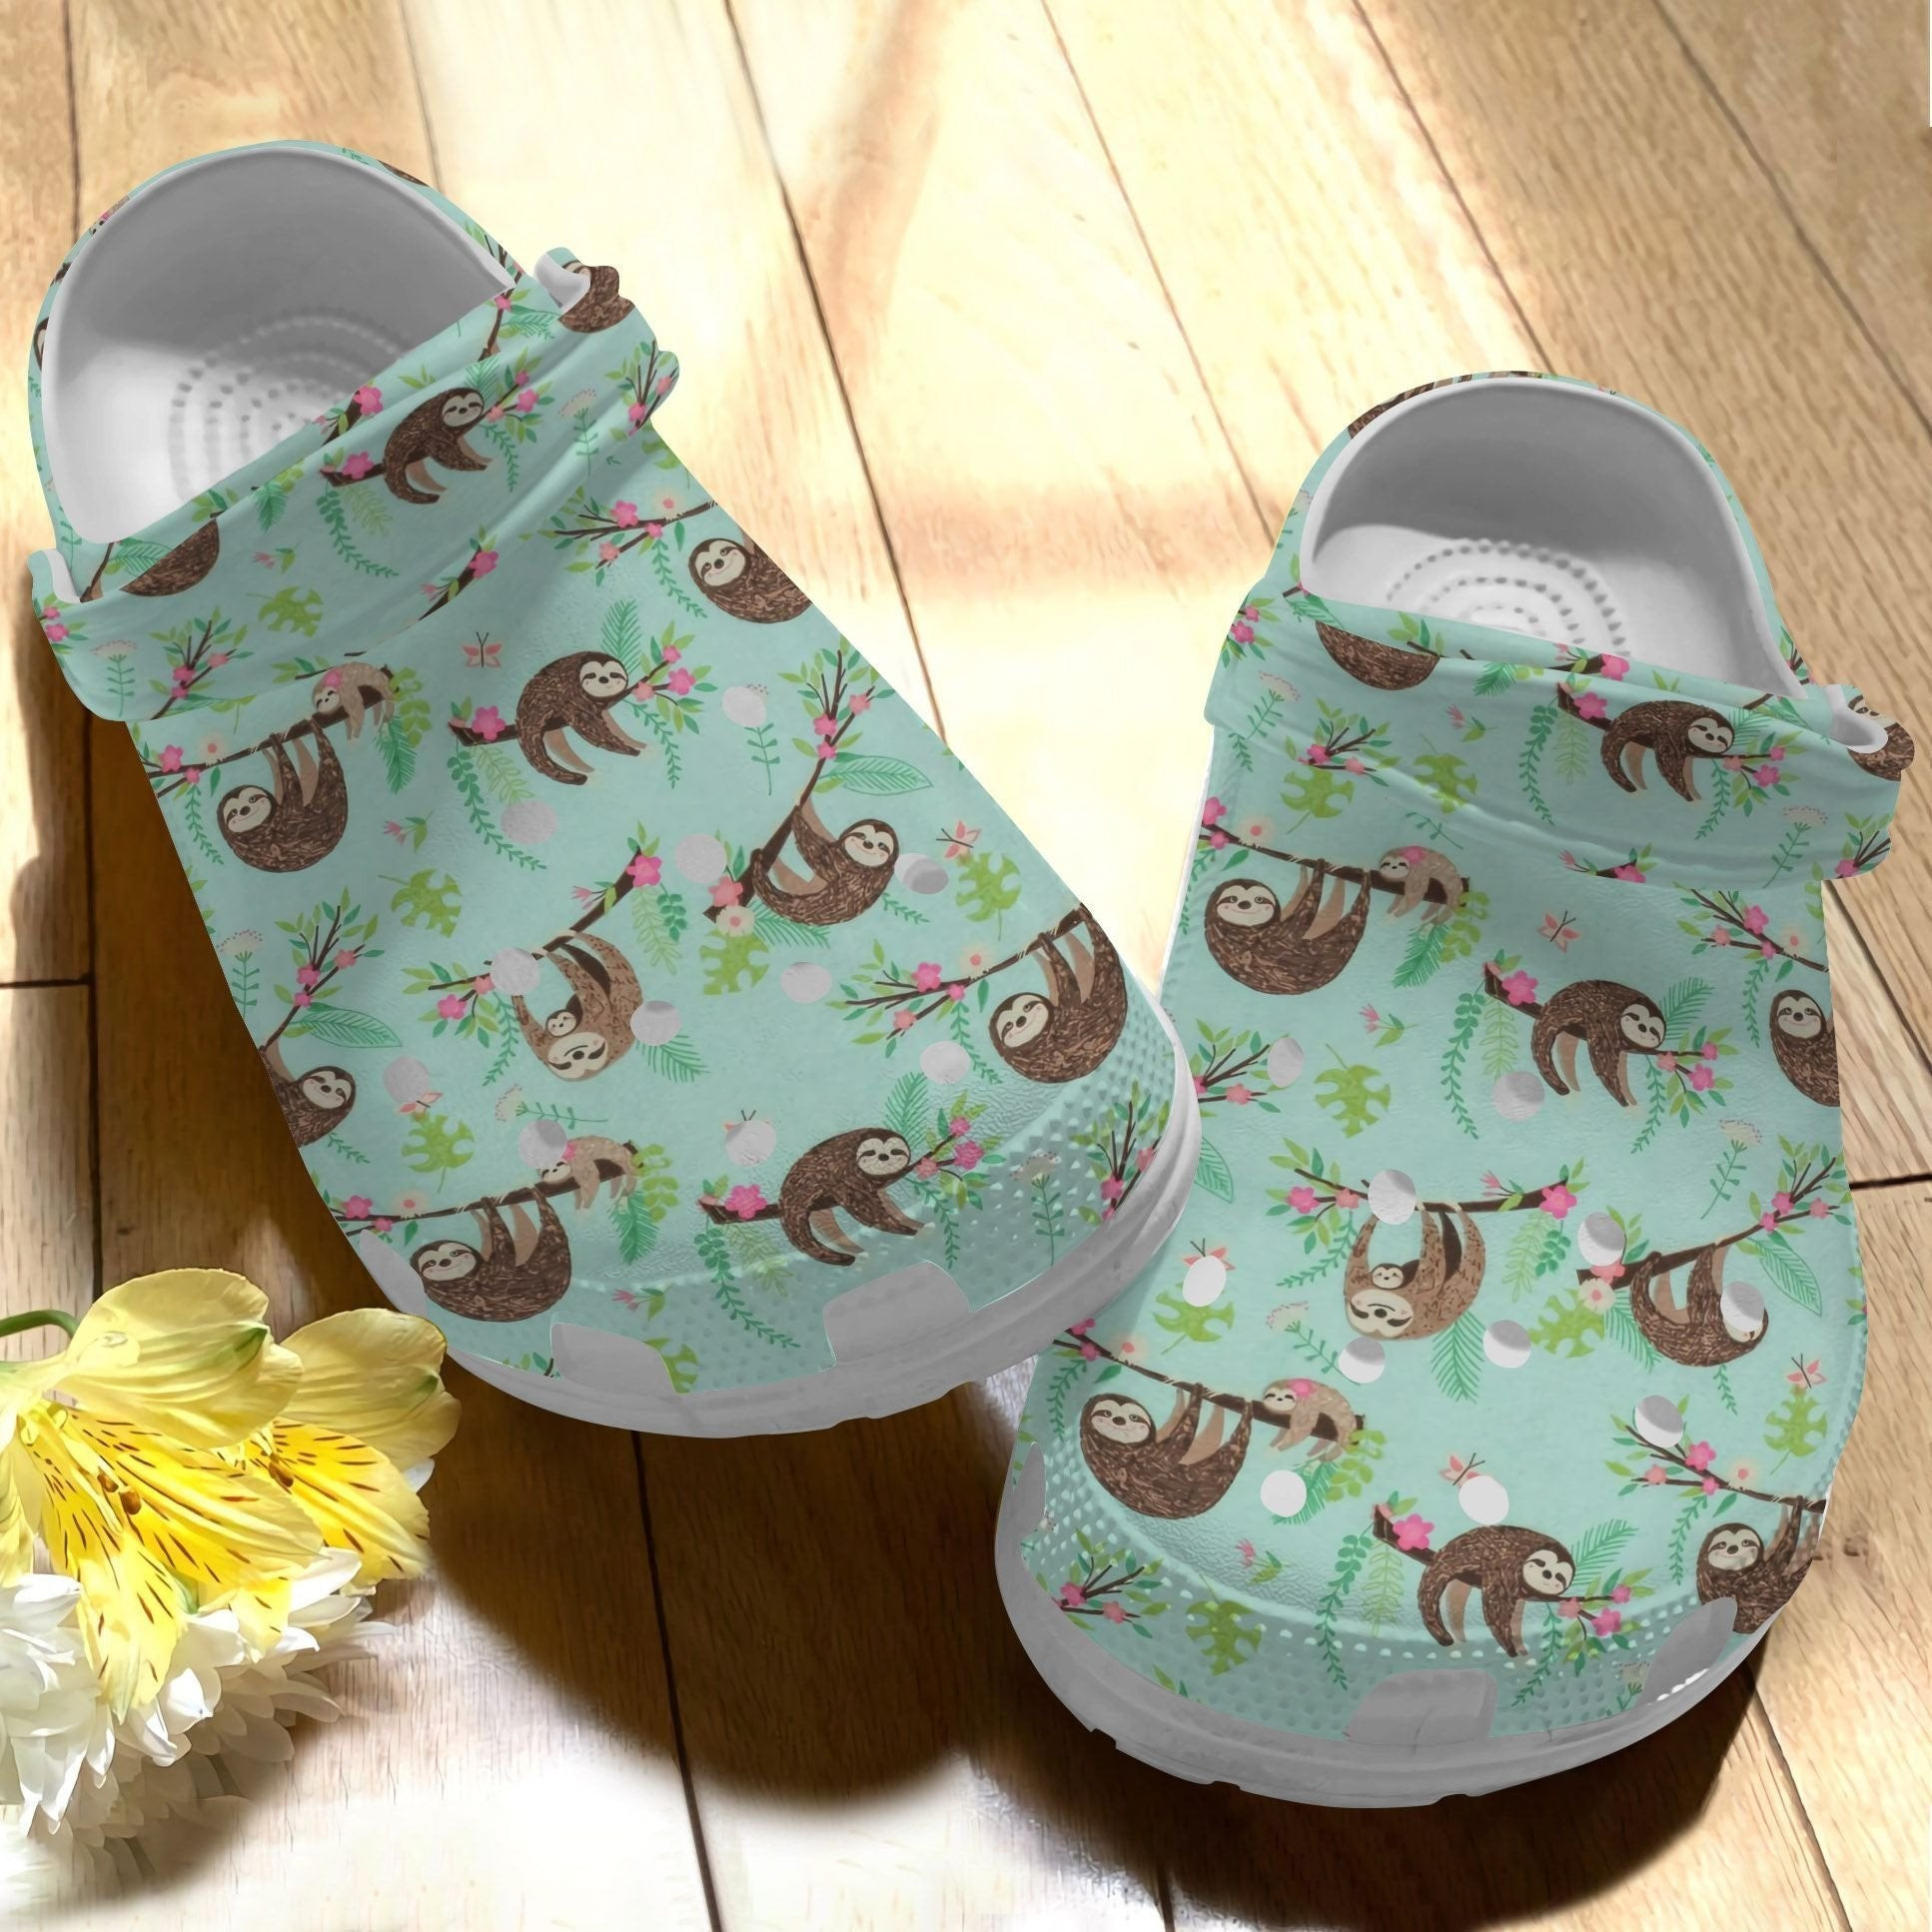 Lovely Sloth Sloths Shoes Crocbland Clogs Crocs Birthday Gift For Children